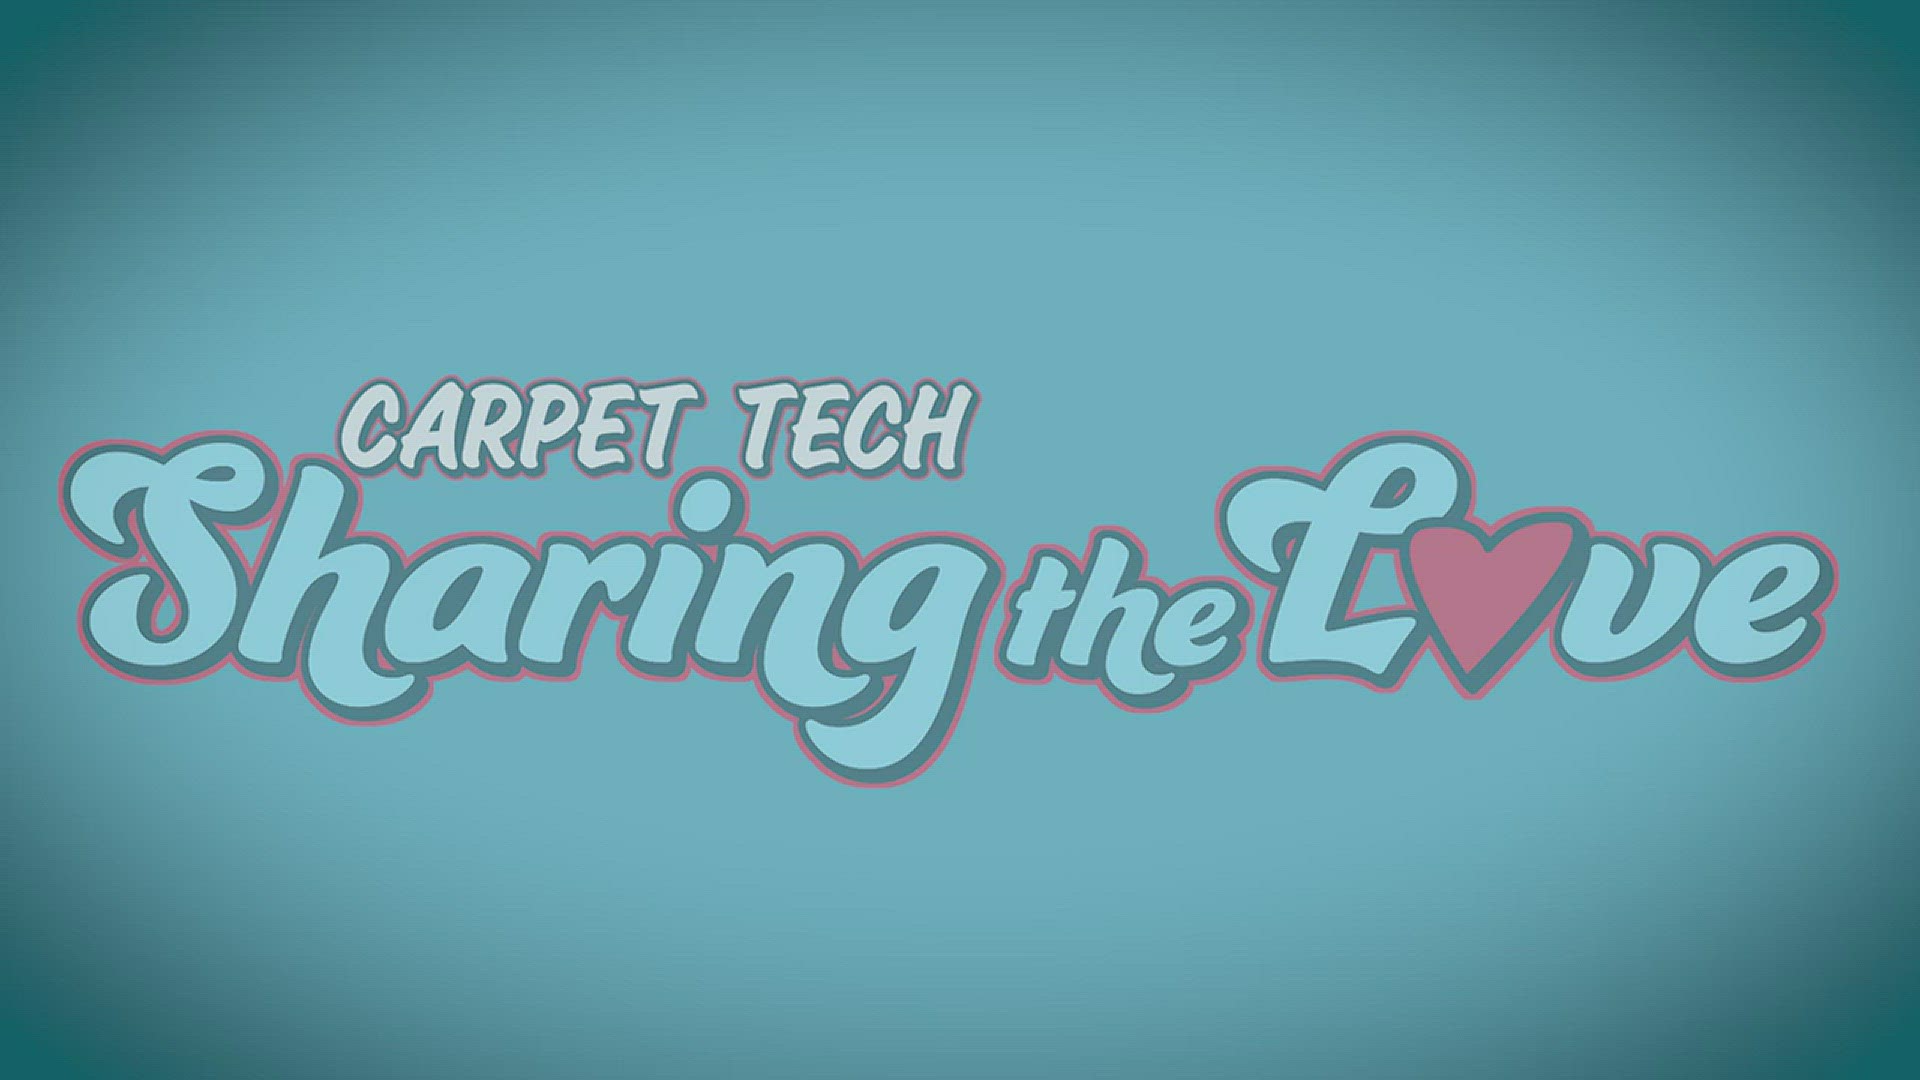 Carpet Tech is sharing the love with Thriving United.